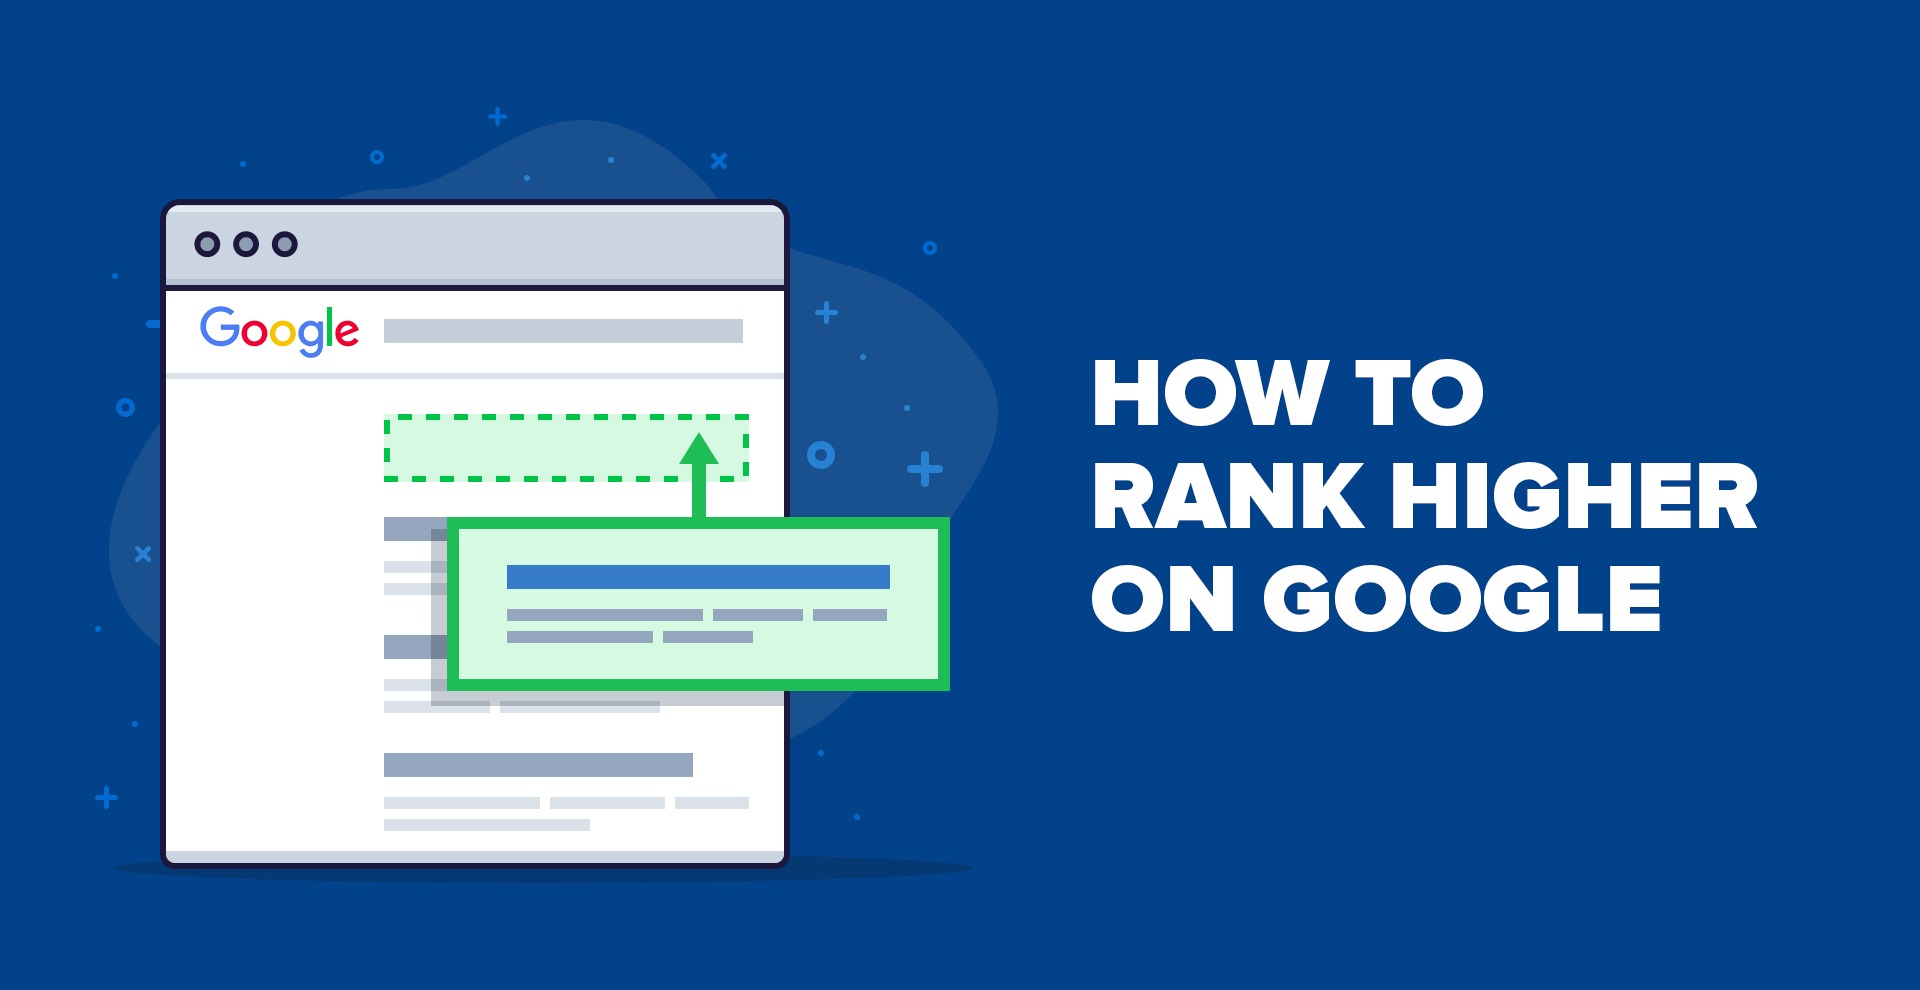 How Can Make Your Website Rank Higher And Boost Your Google Ranking?